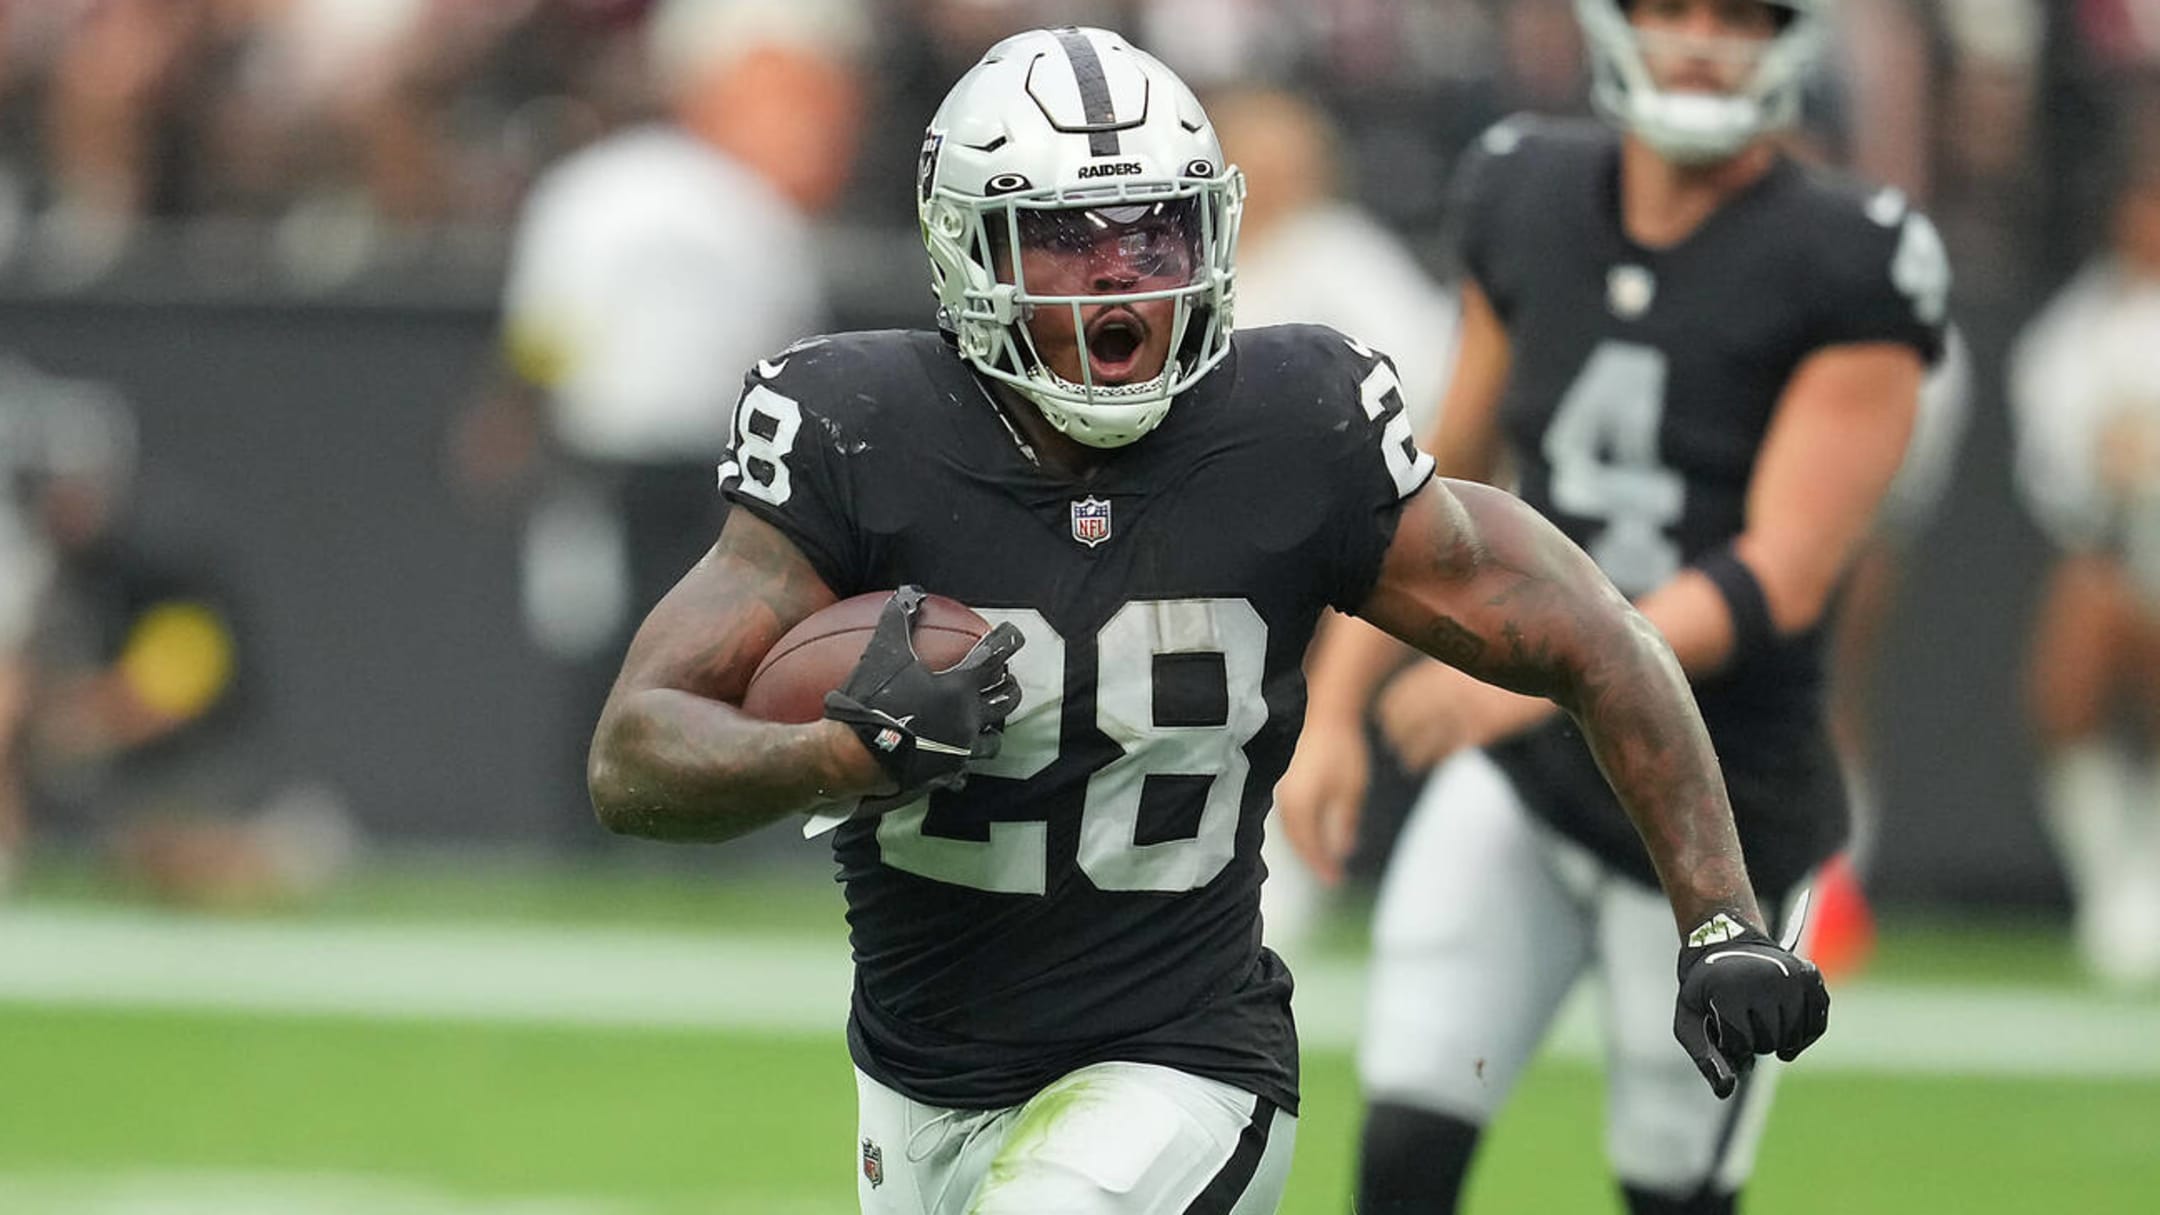 Report: Raiders RB Jacobs Won't Report To Camp On Time